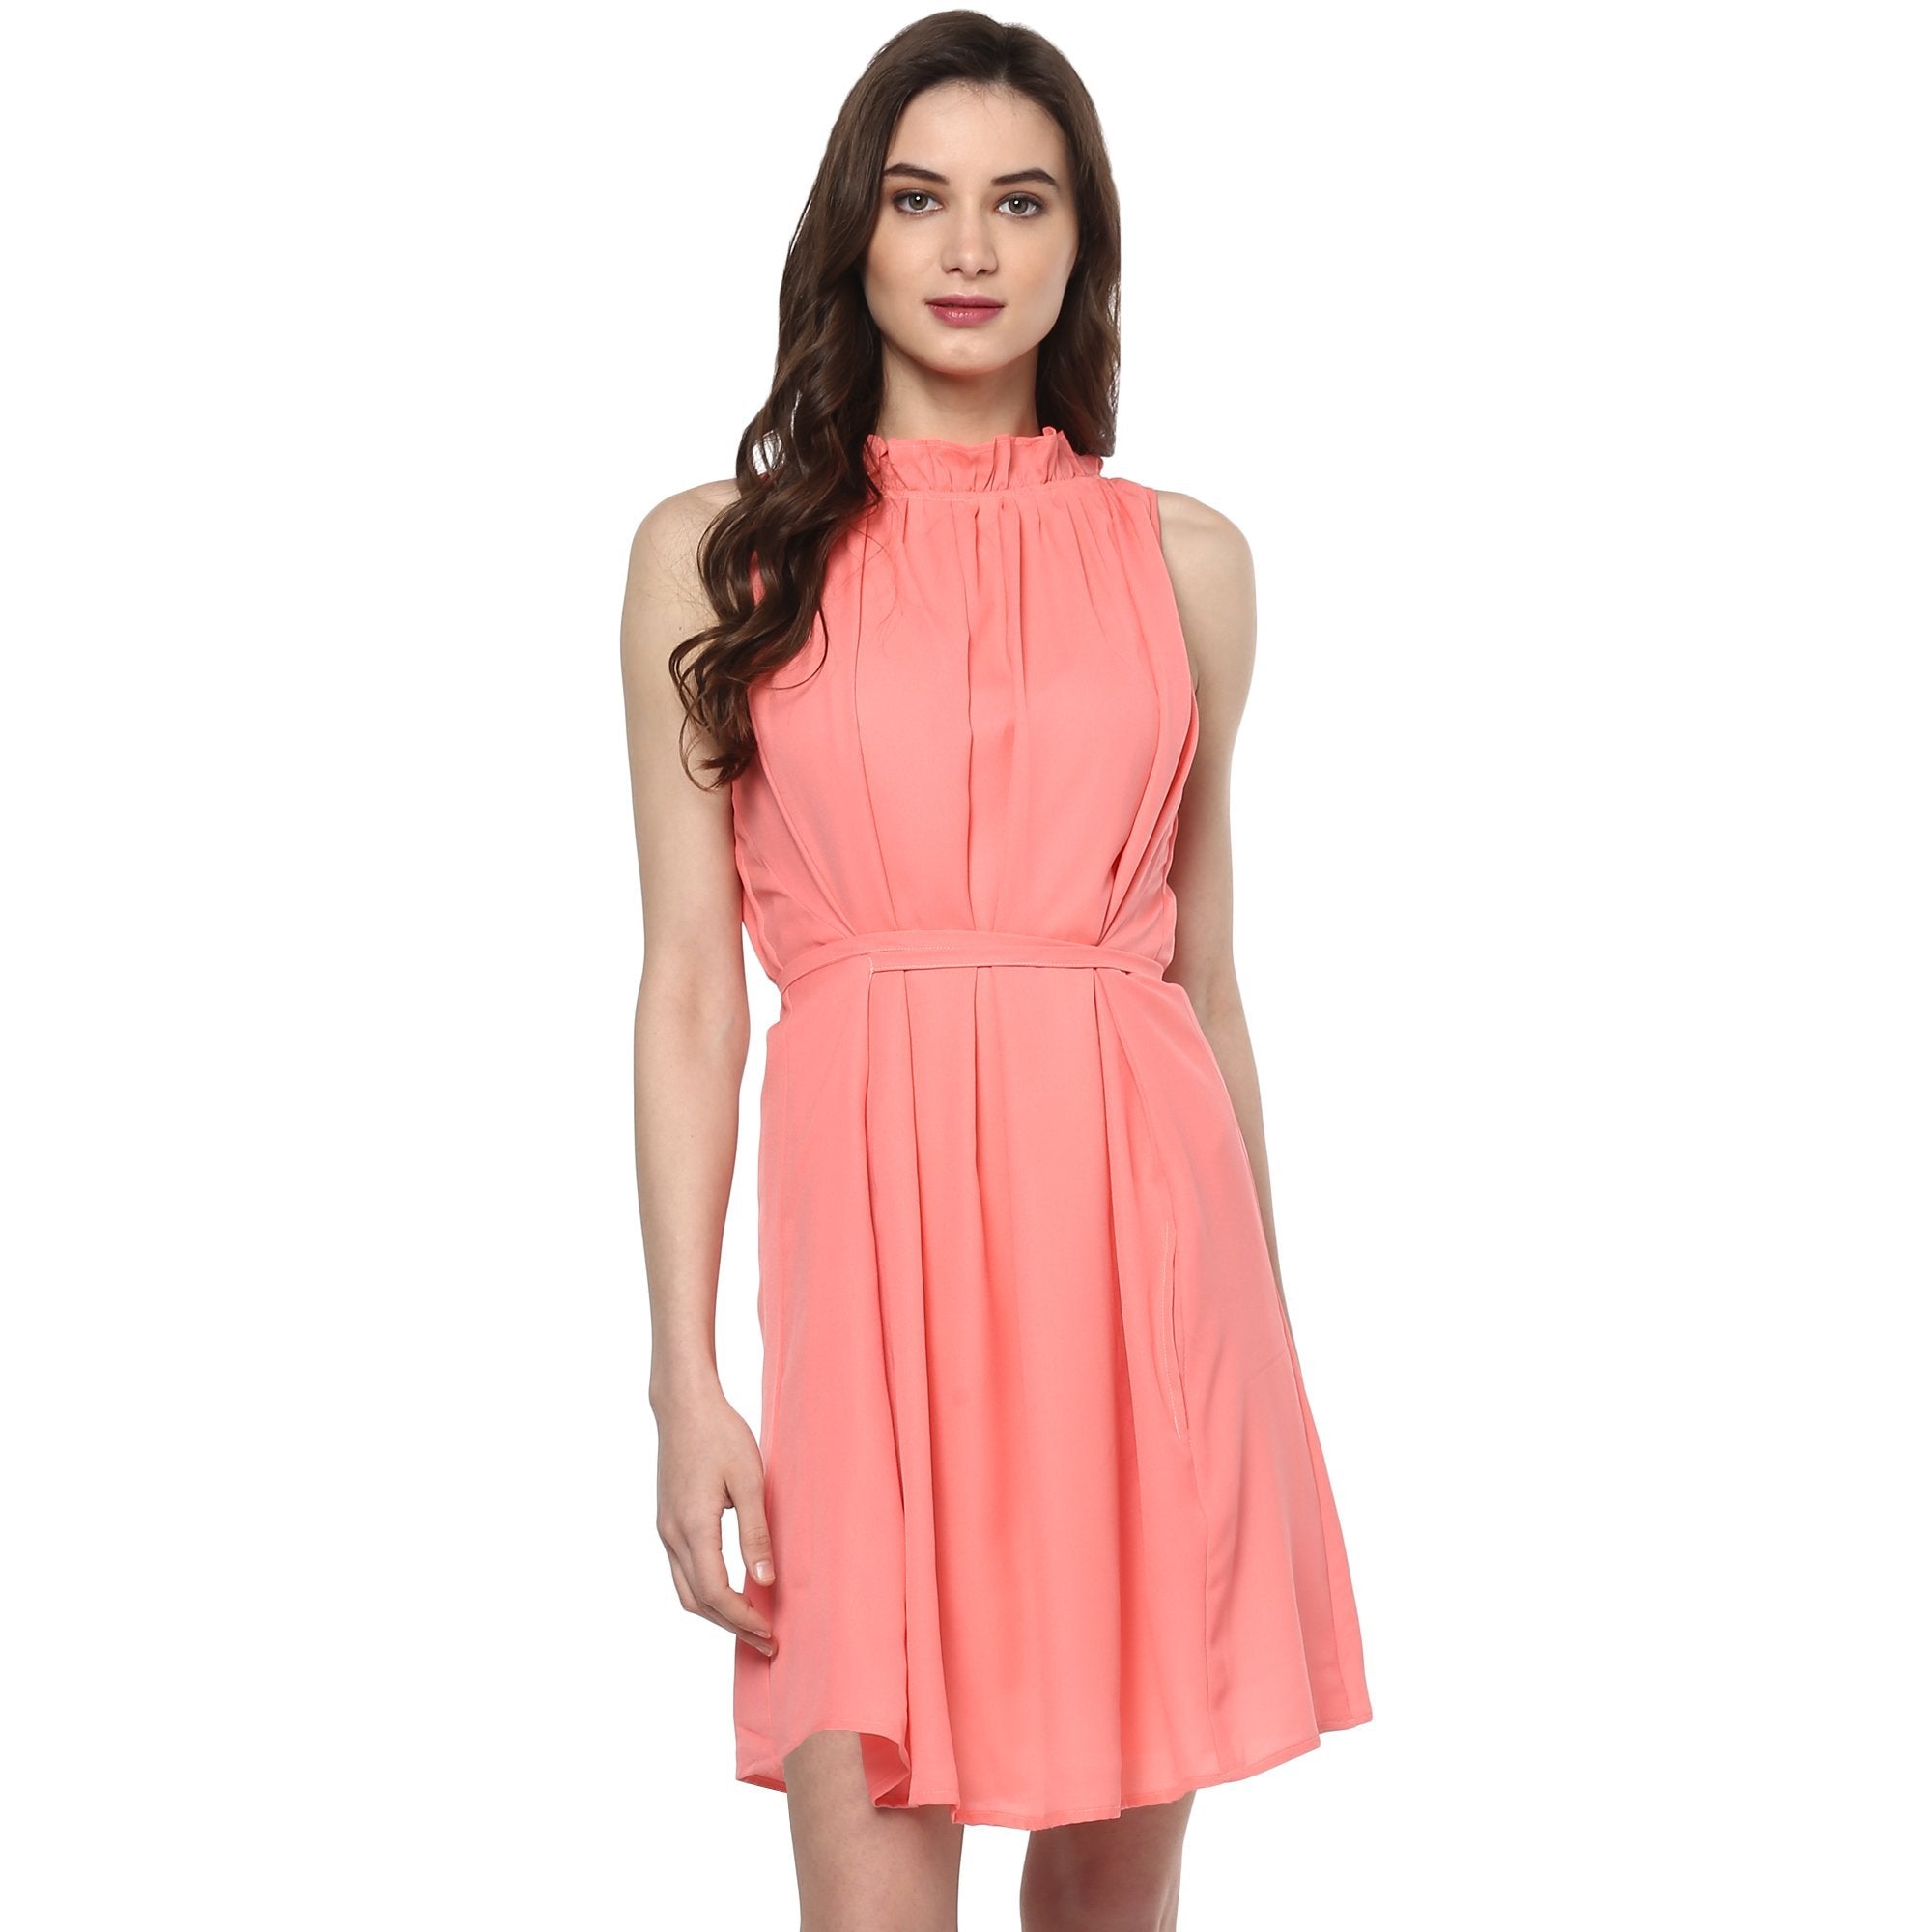 Women's Solid Flared Dress - Pannkh